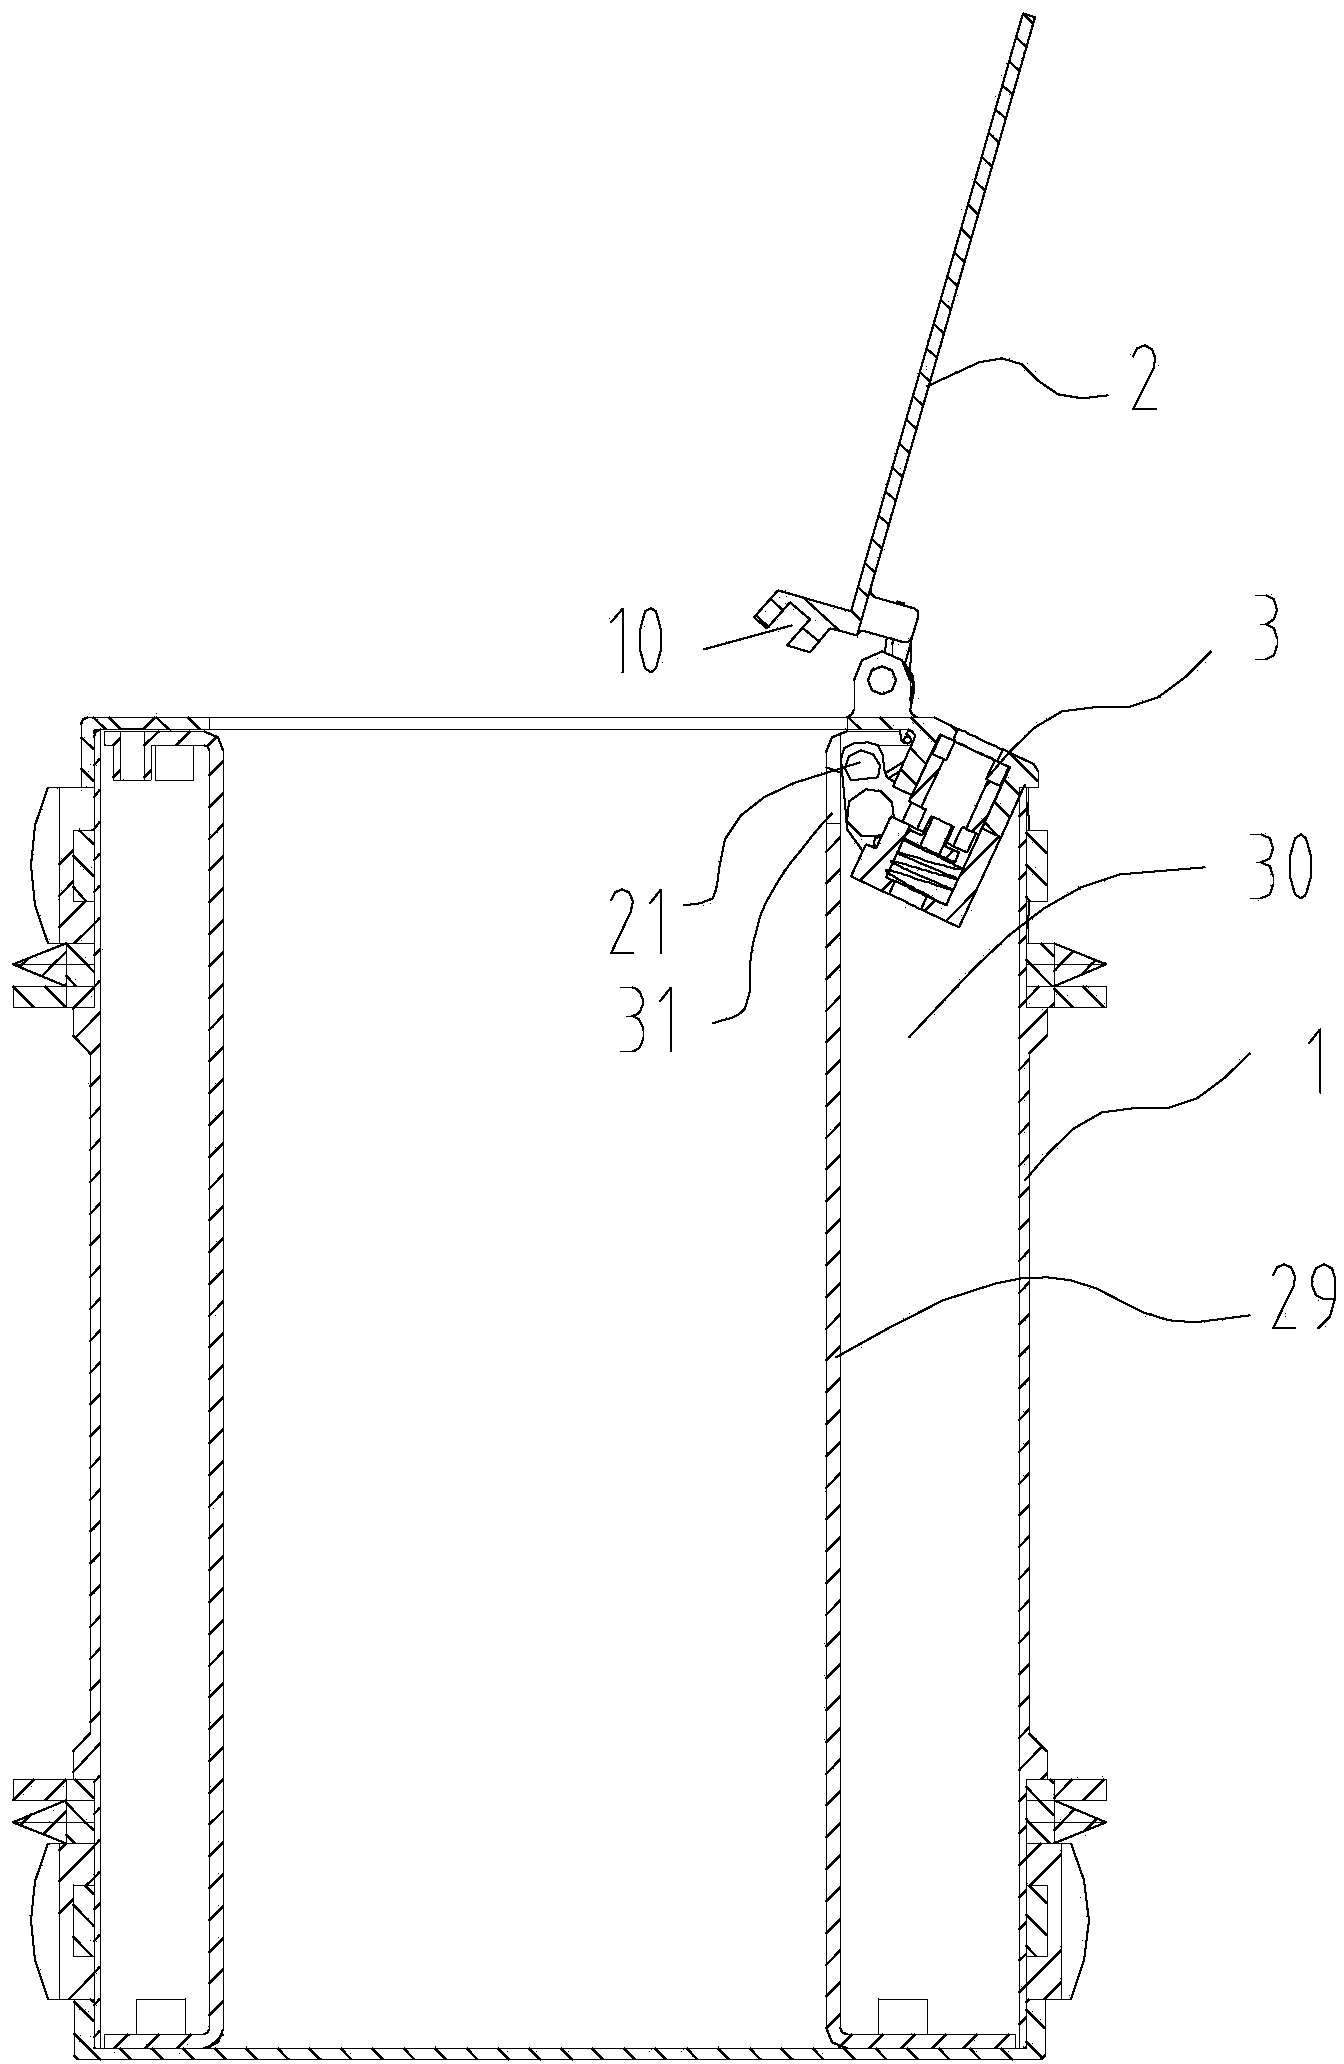 Conveyer avoiding man-made interference and method for locking door of conveyer